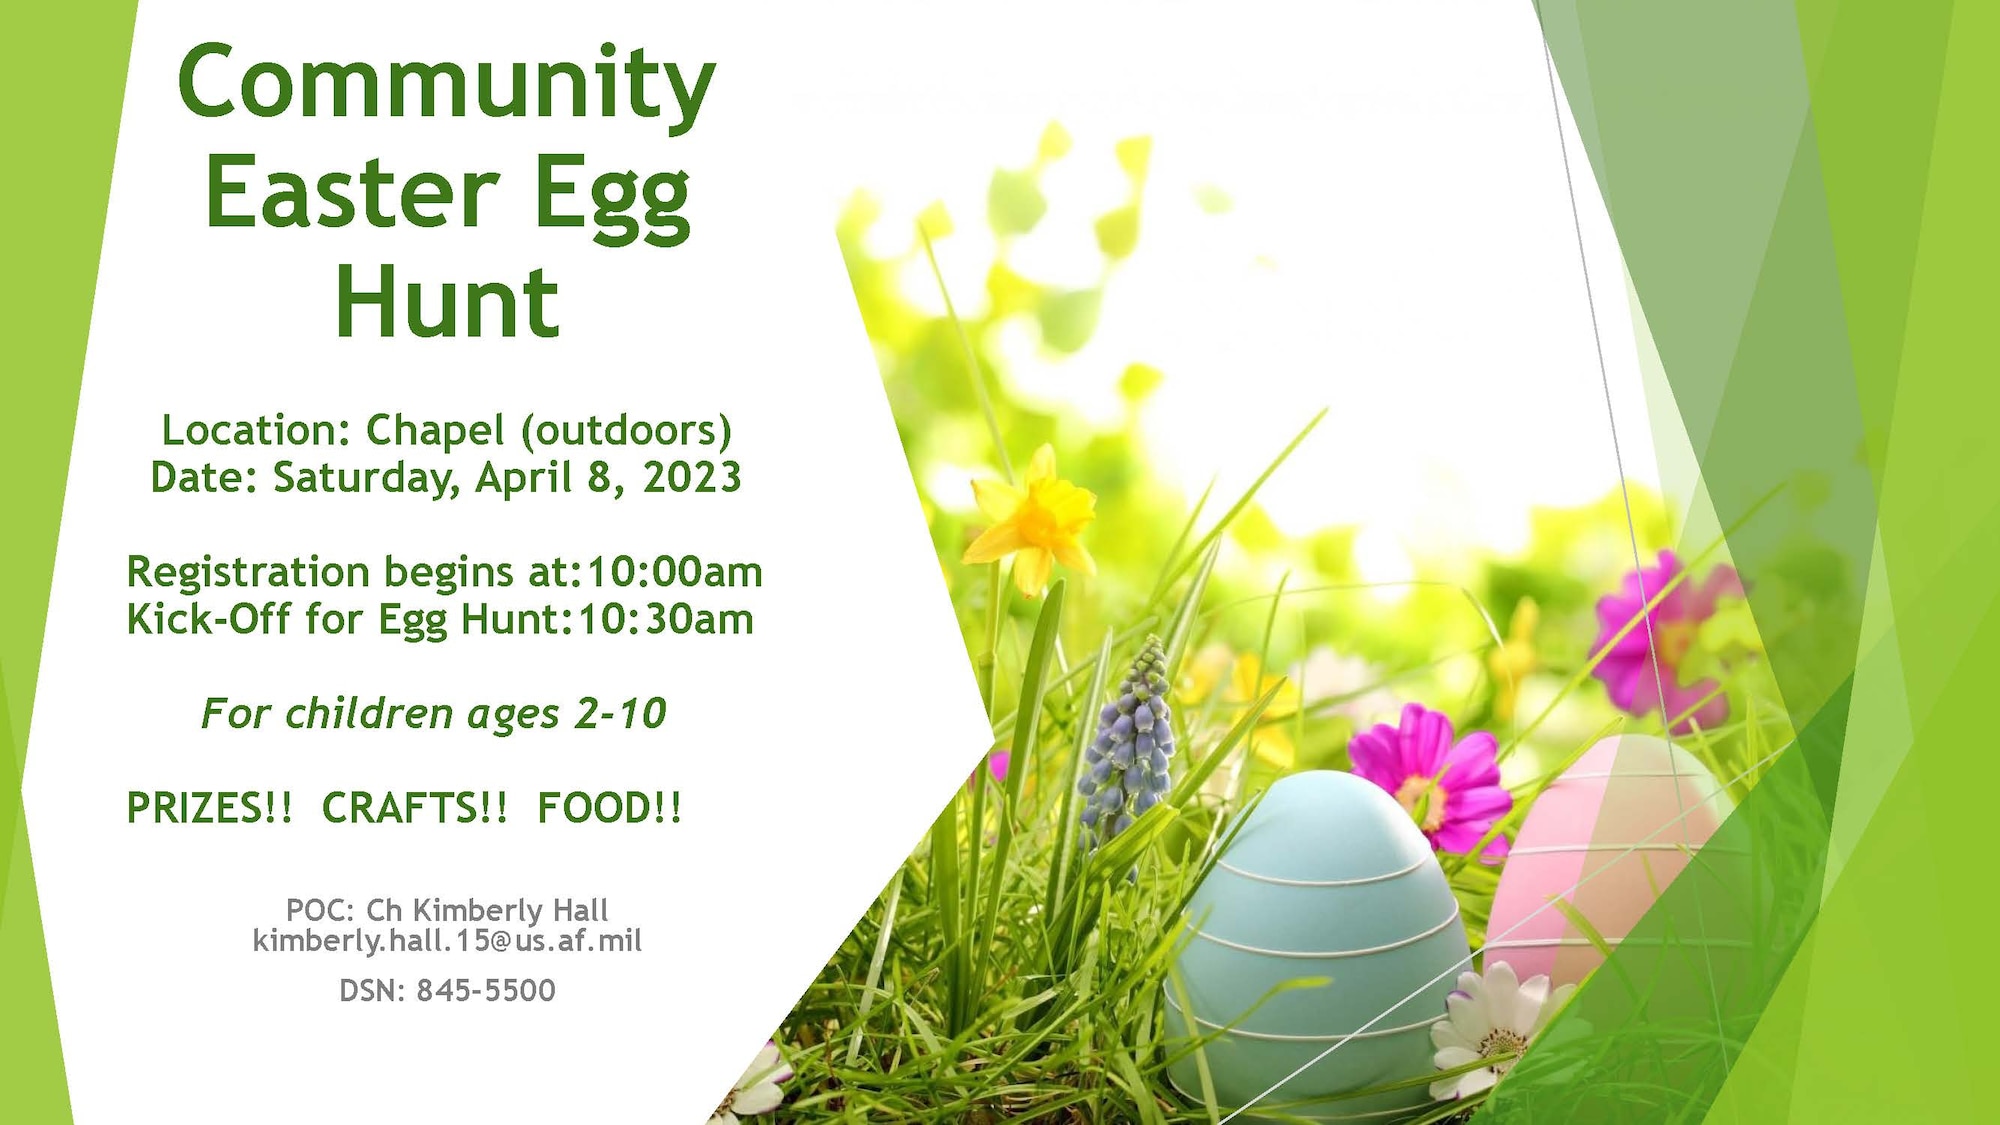 The Chapel at Hanscom Air Force Base, Mass., will host a community Easter egg hunt on the chapel grounds April 8 to celebrate the spring and Easter season. The event is open to all families with base access and will feature crafts, prizes, and food. (Courtesy Graphic)